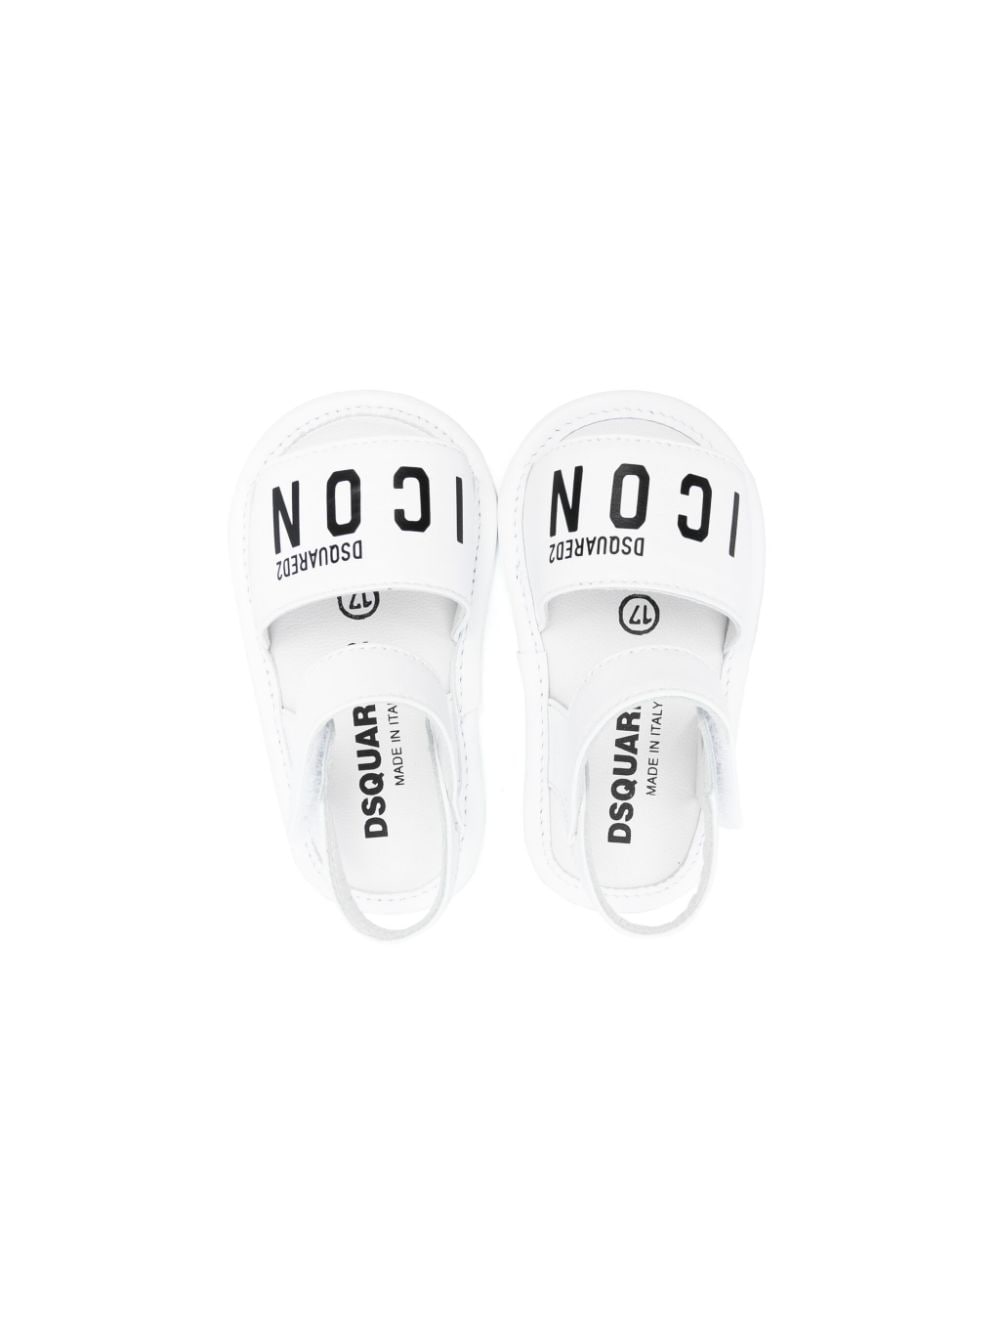 White baby slippers with logo